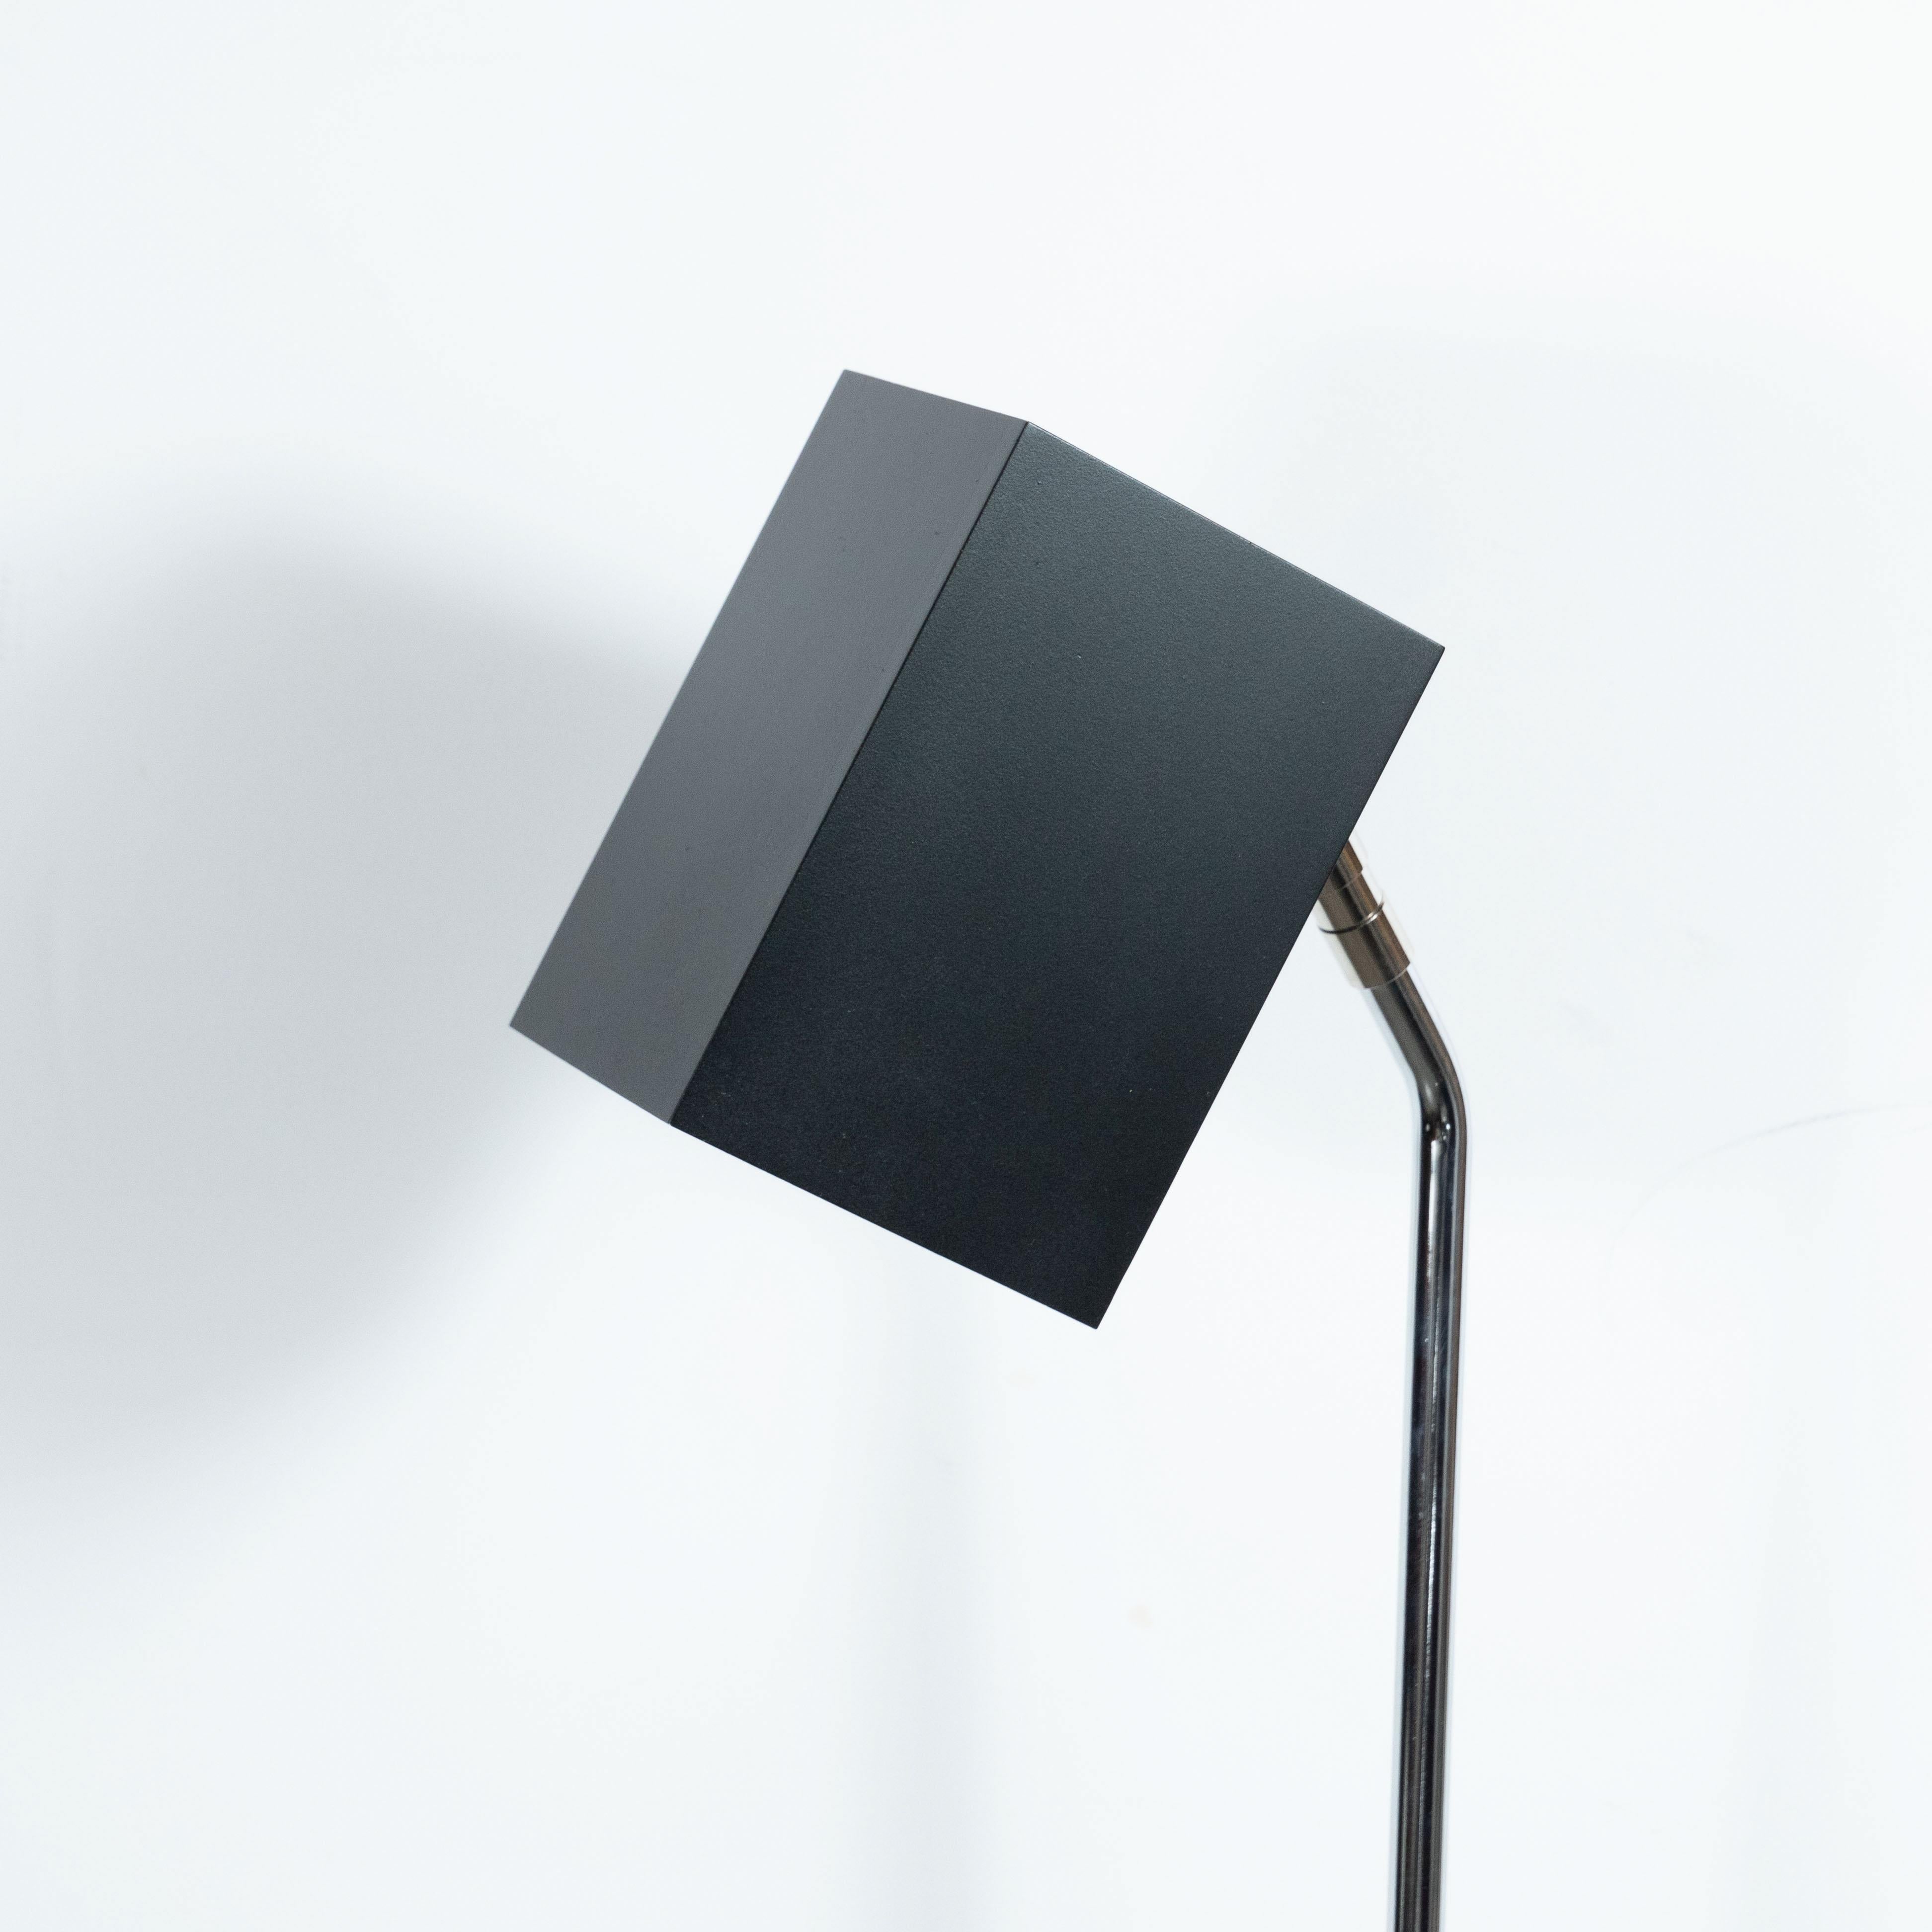 This sleek floor lamp was designed by Robert Sonneman for George Kovacs, circa 1970. Sonneman's innovative light fixtures are studies in movement, weight, and balance. His designs are critically lauded and have been exhibited at the Museum of Modern